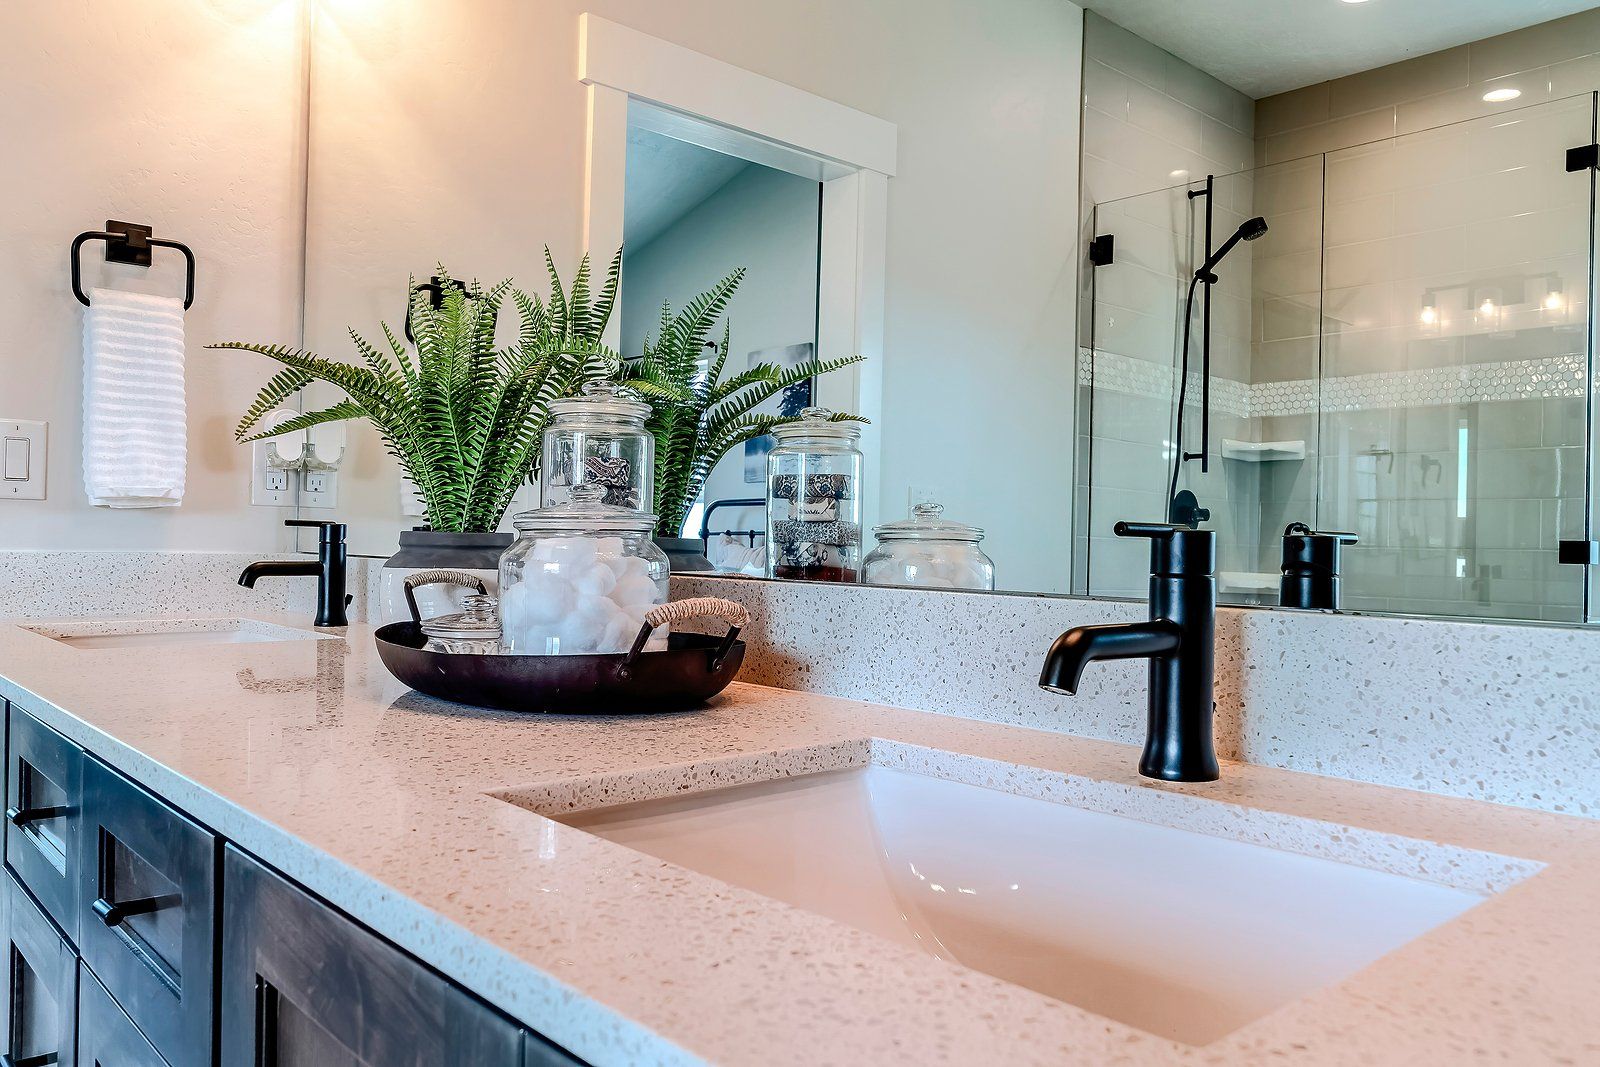 Countertop Remodeling Services Near You